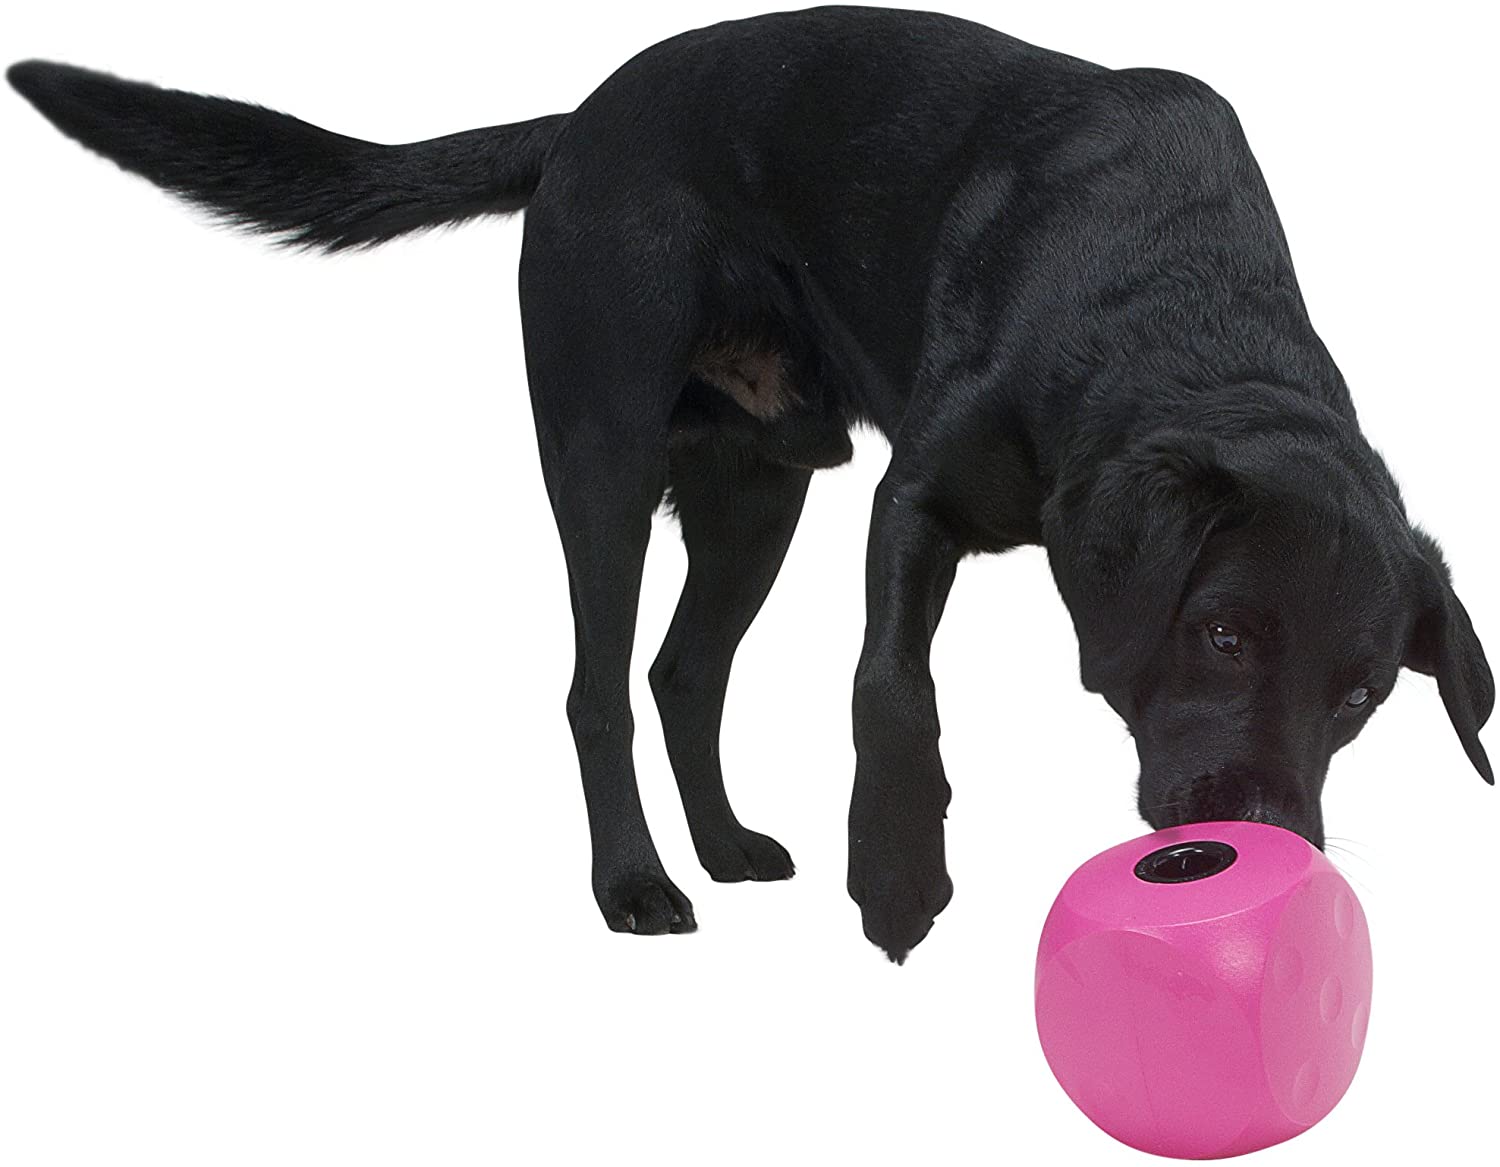 7 Fun Dog Toys You Can Freeze – Great for Hot Summer Days